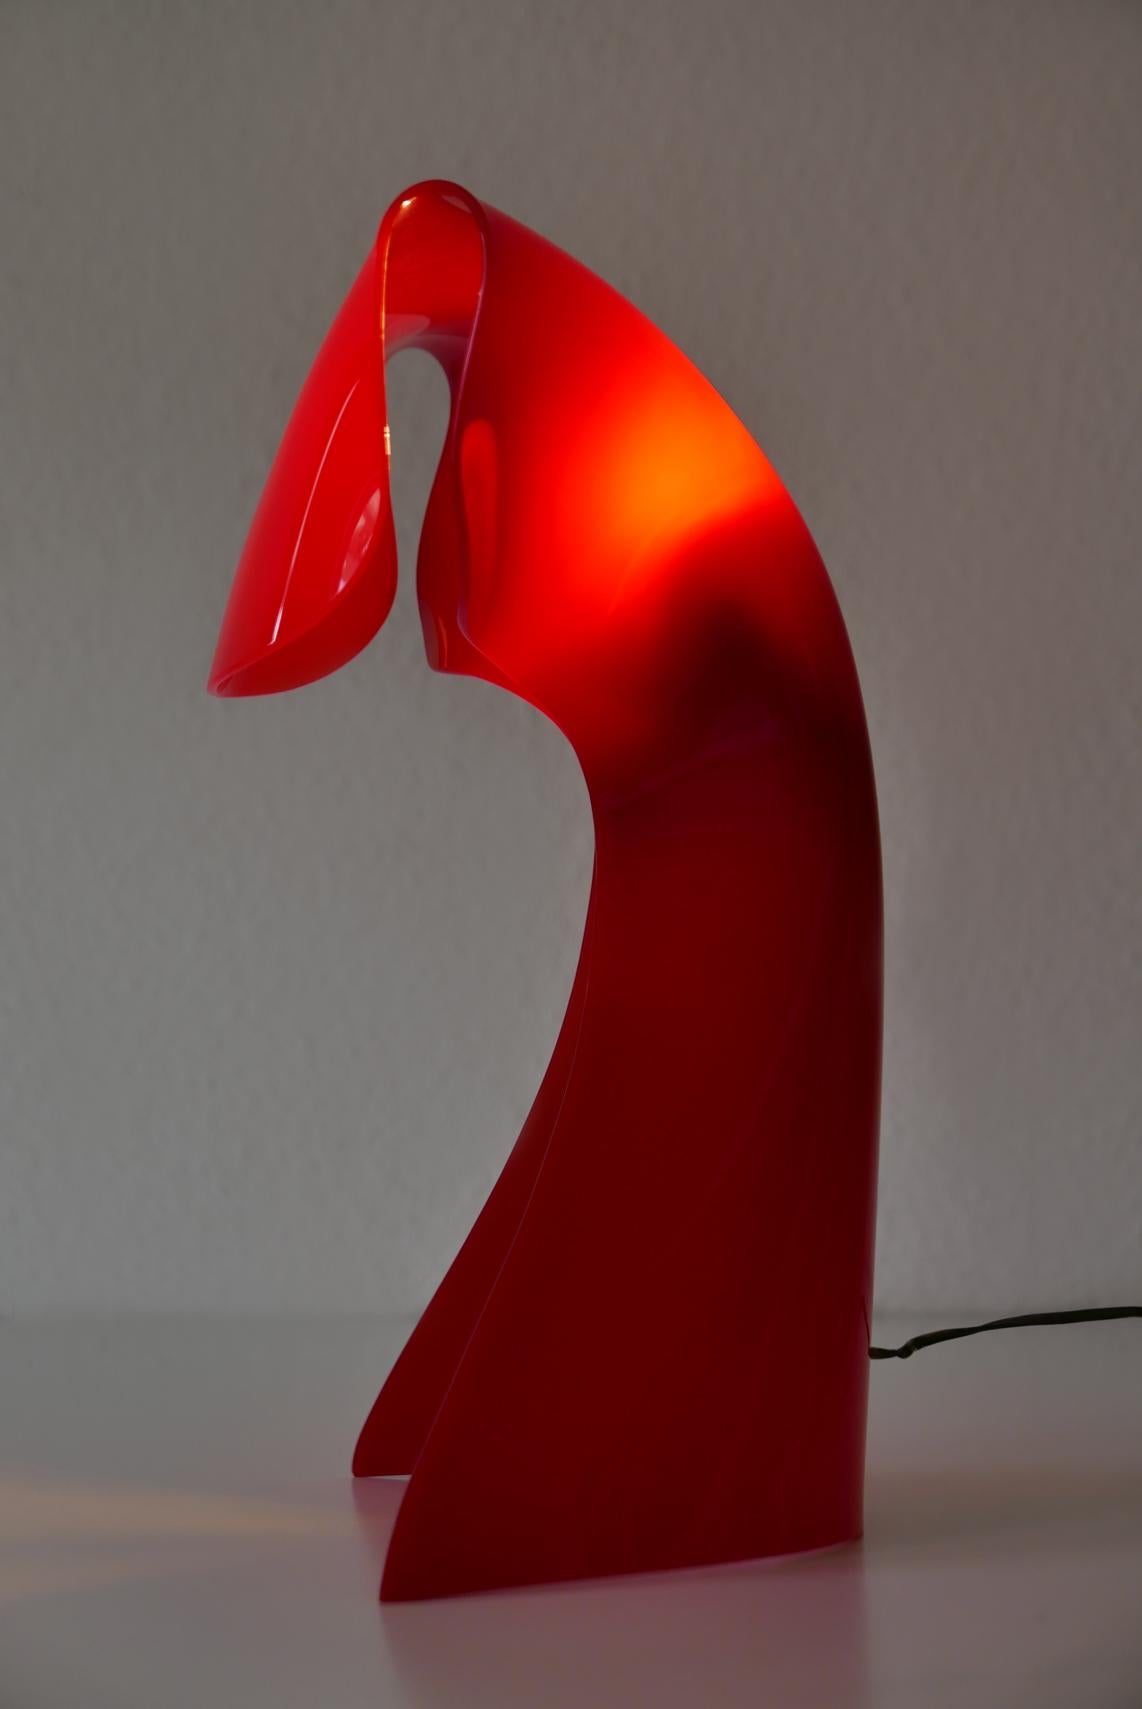 Extremely rare, sculptural Mid-Century Modern Lucite table lamp. Designed by Hanns Hoffmann-Lederer in 1950s for Heinz Hecht, Darmstadt, Germany.

Executed in red Lucite. The lamp needs 1 x E14 Edison screw fit bulb holder, is with original wiring